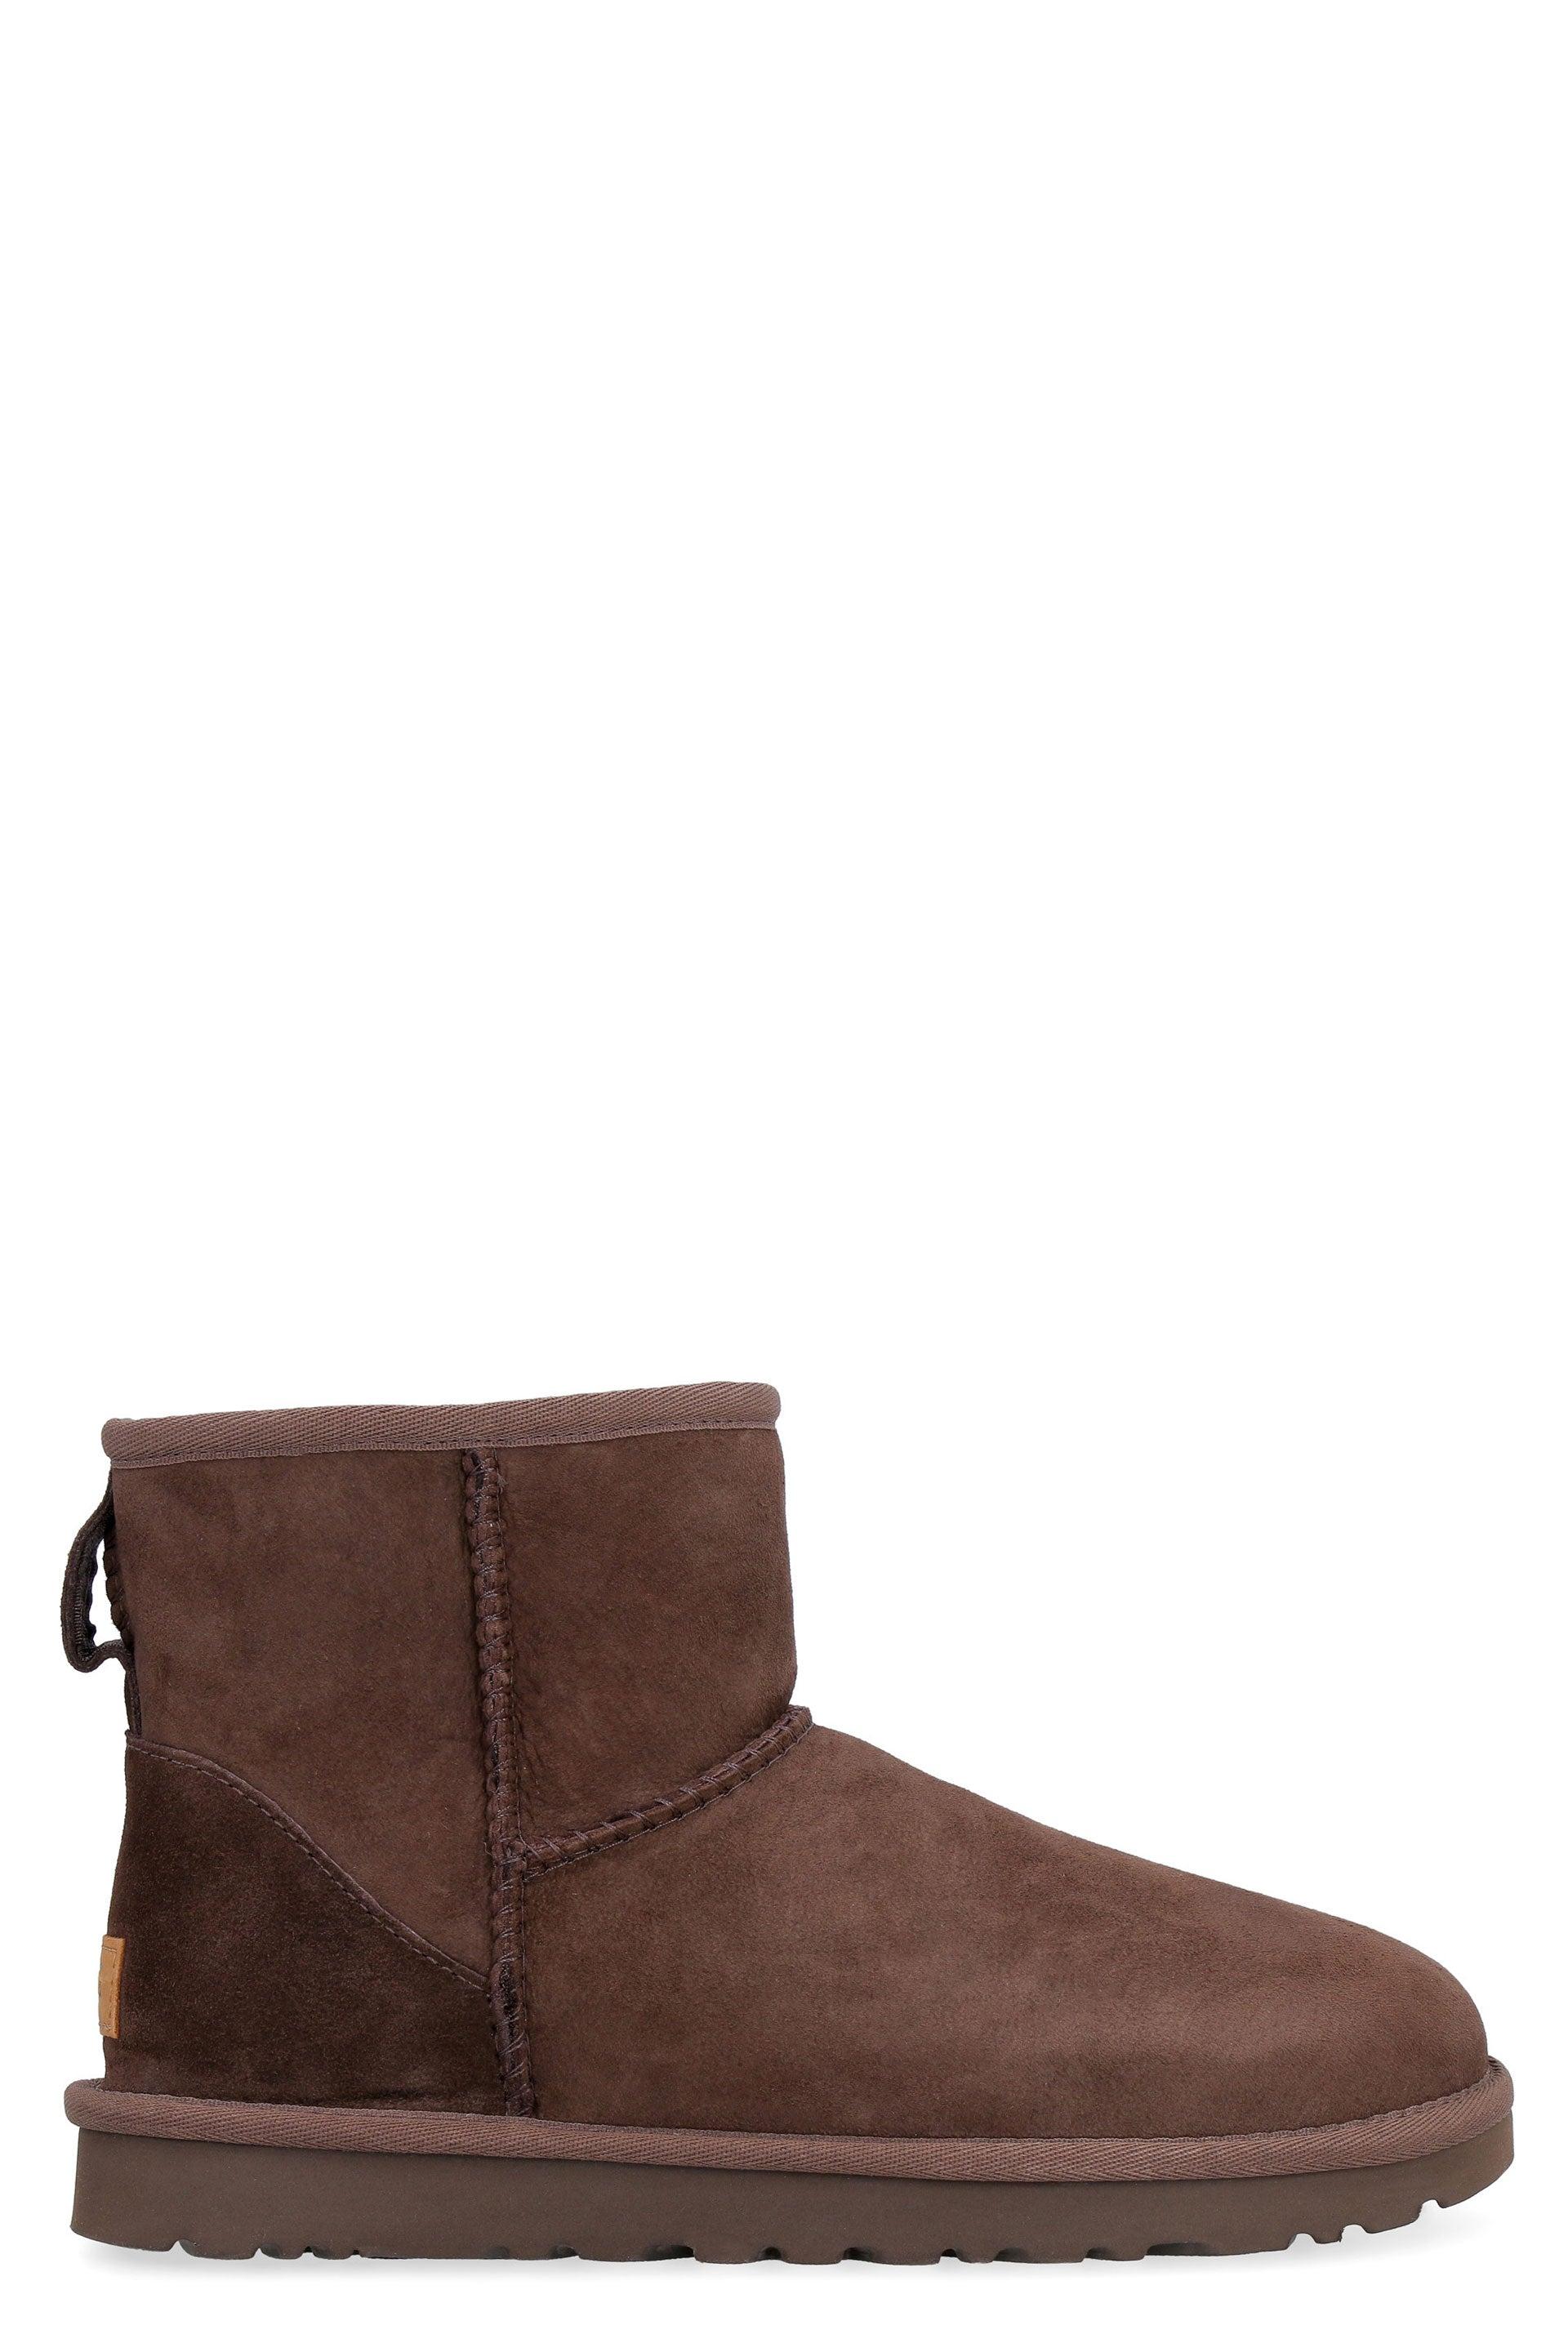 UGG Classic Mini Ii Ankle Boots in Brown | Lyst